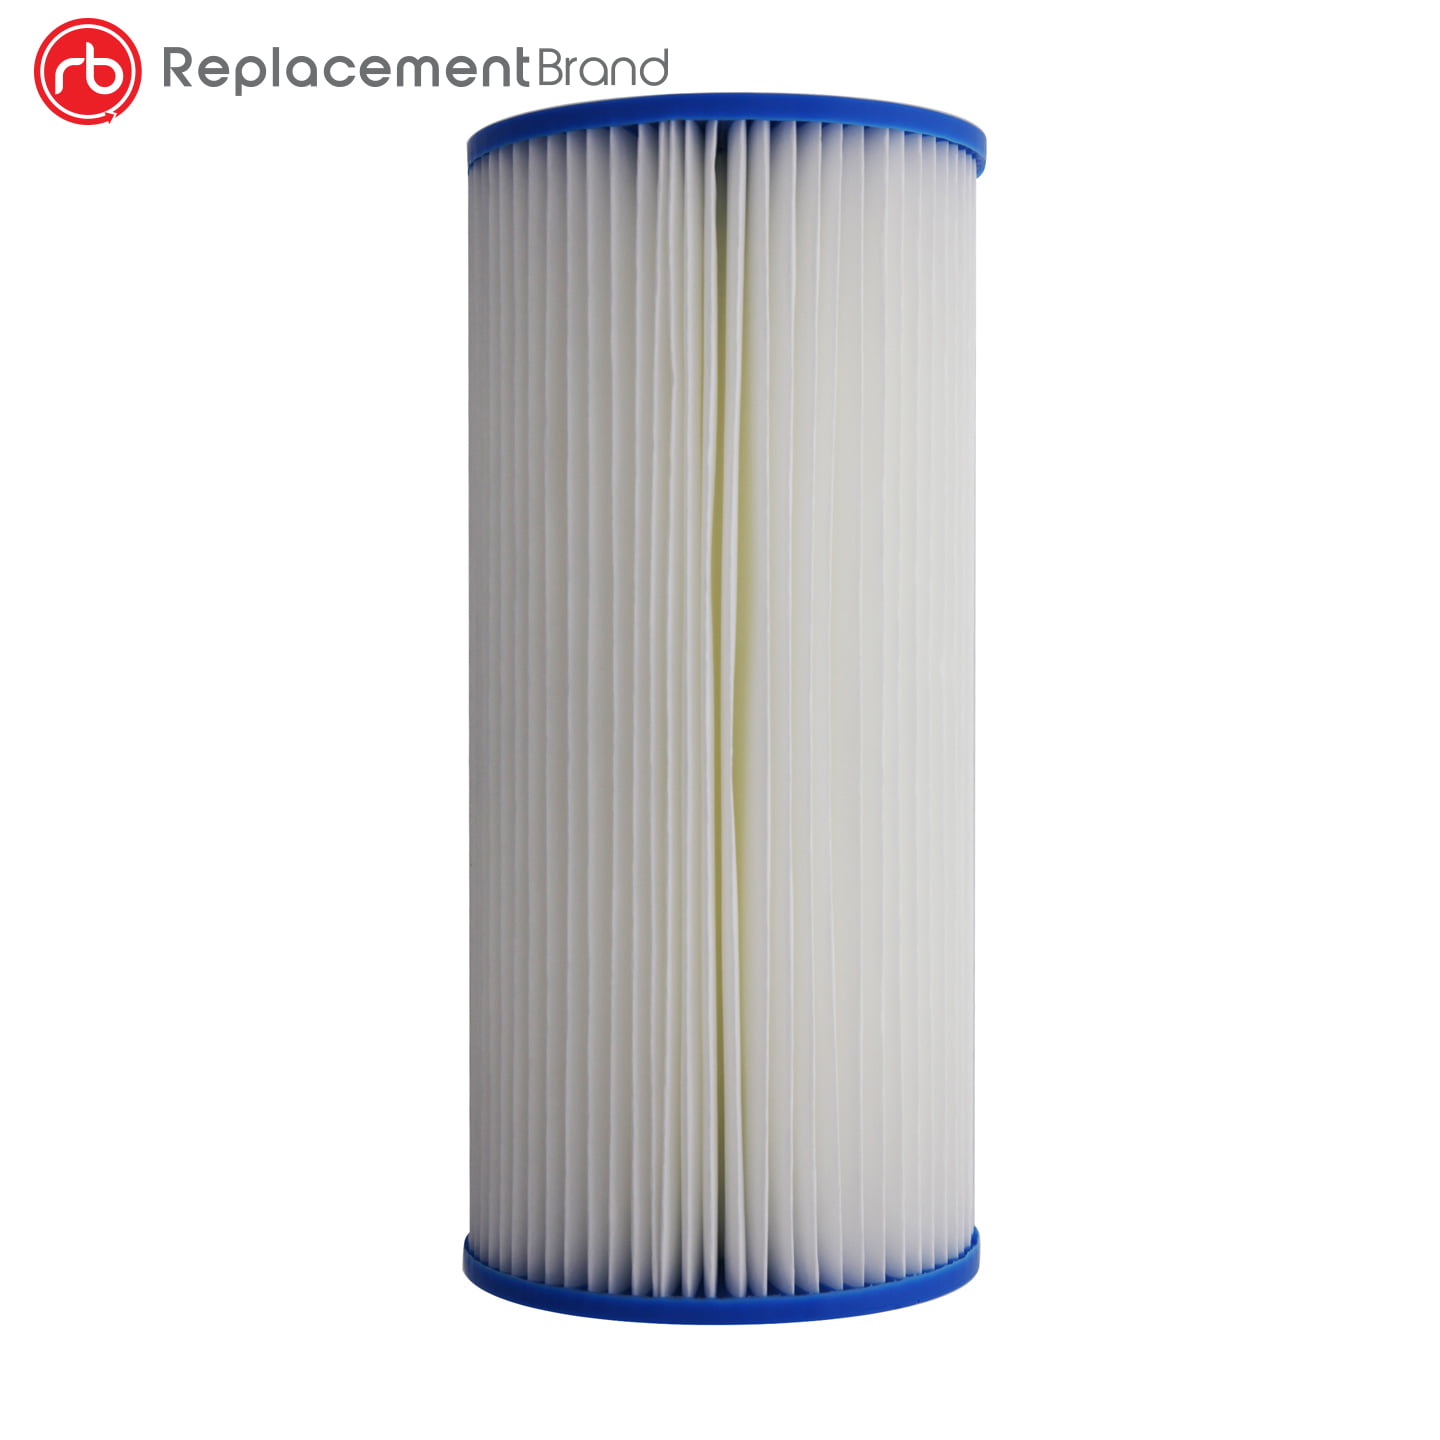 ReplacementBrand R50-BB Pentek Comparable 10 x 4.5 Inch 50 Micron Whole House Pleated Sediment Filter 